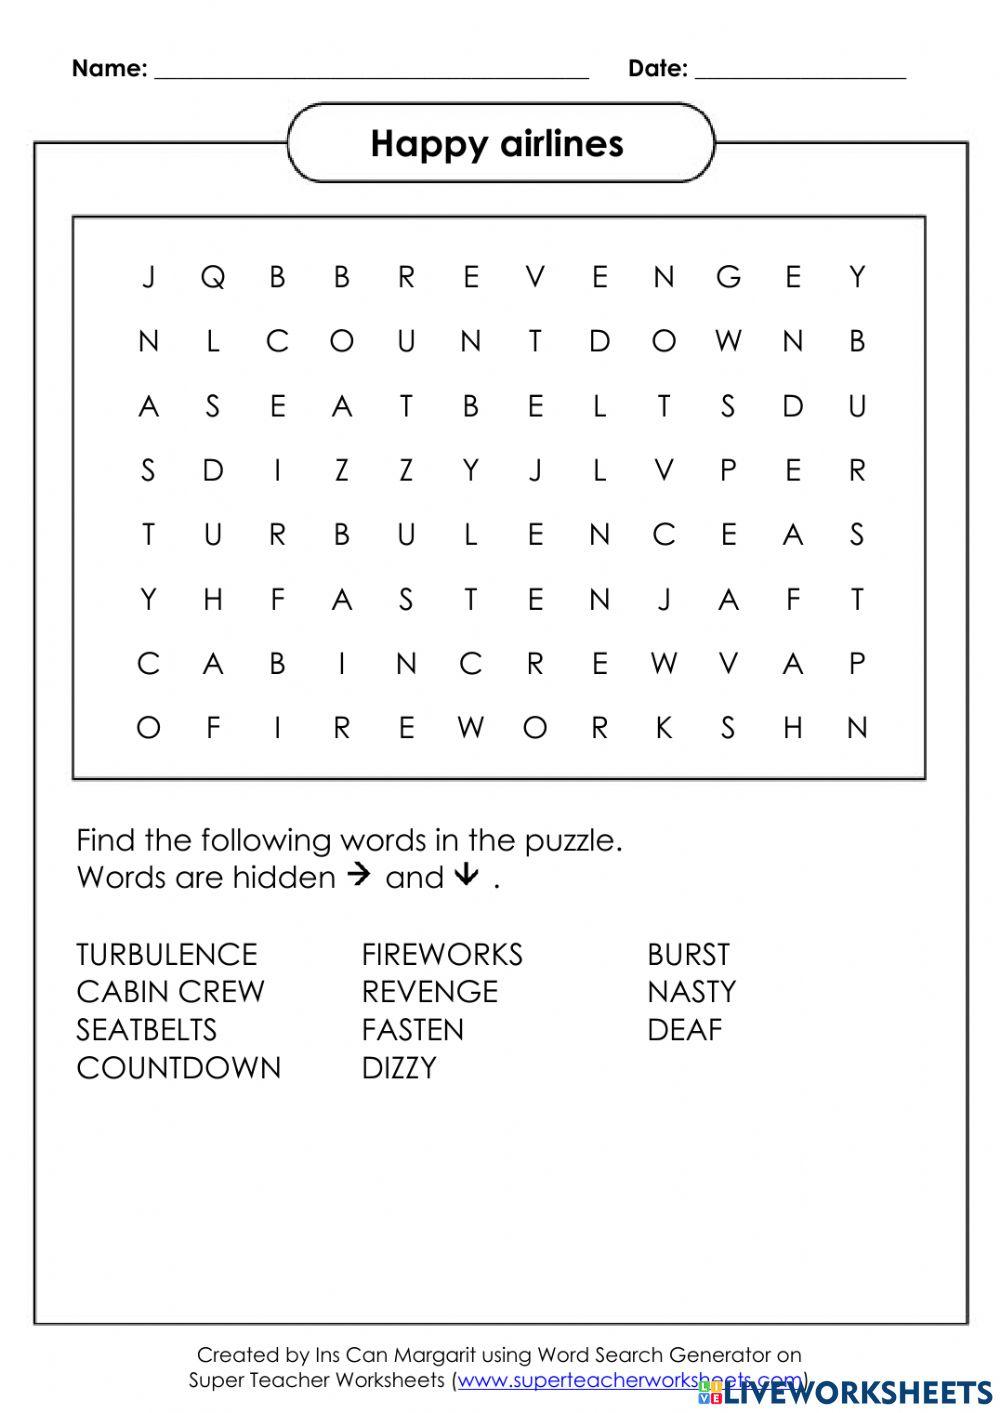 Happy Airlines wordsearch